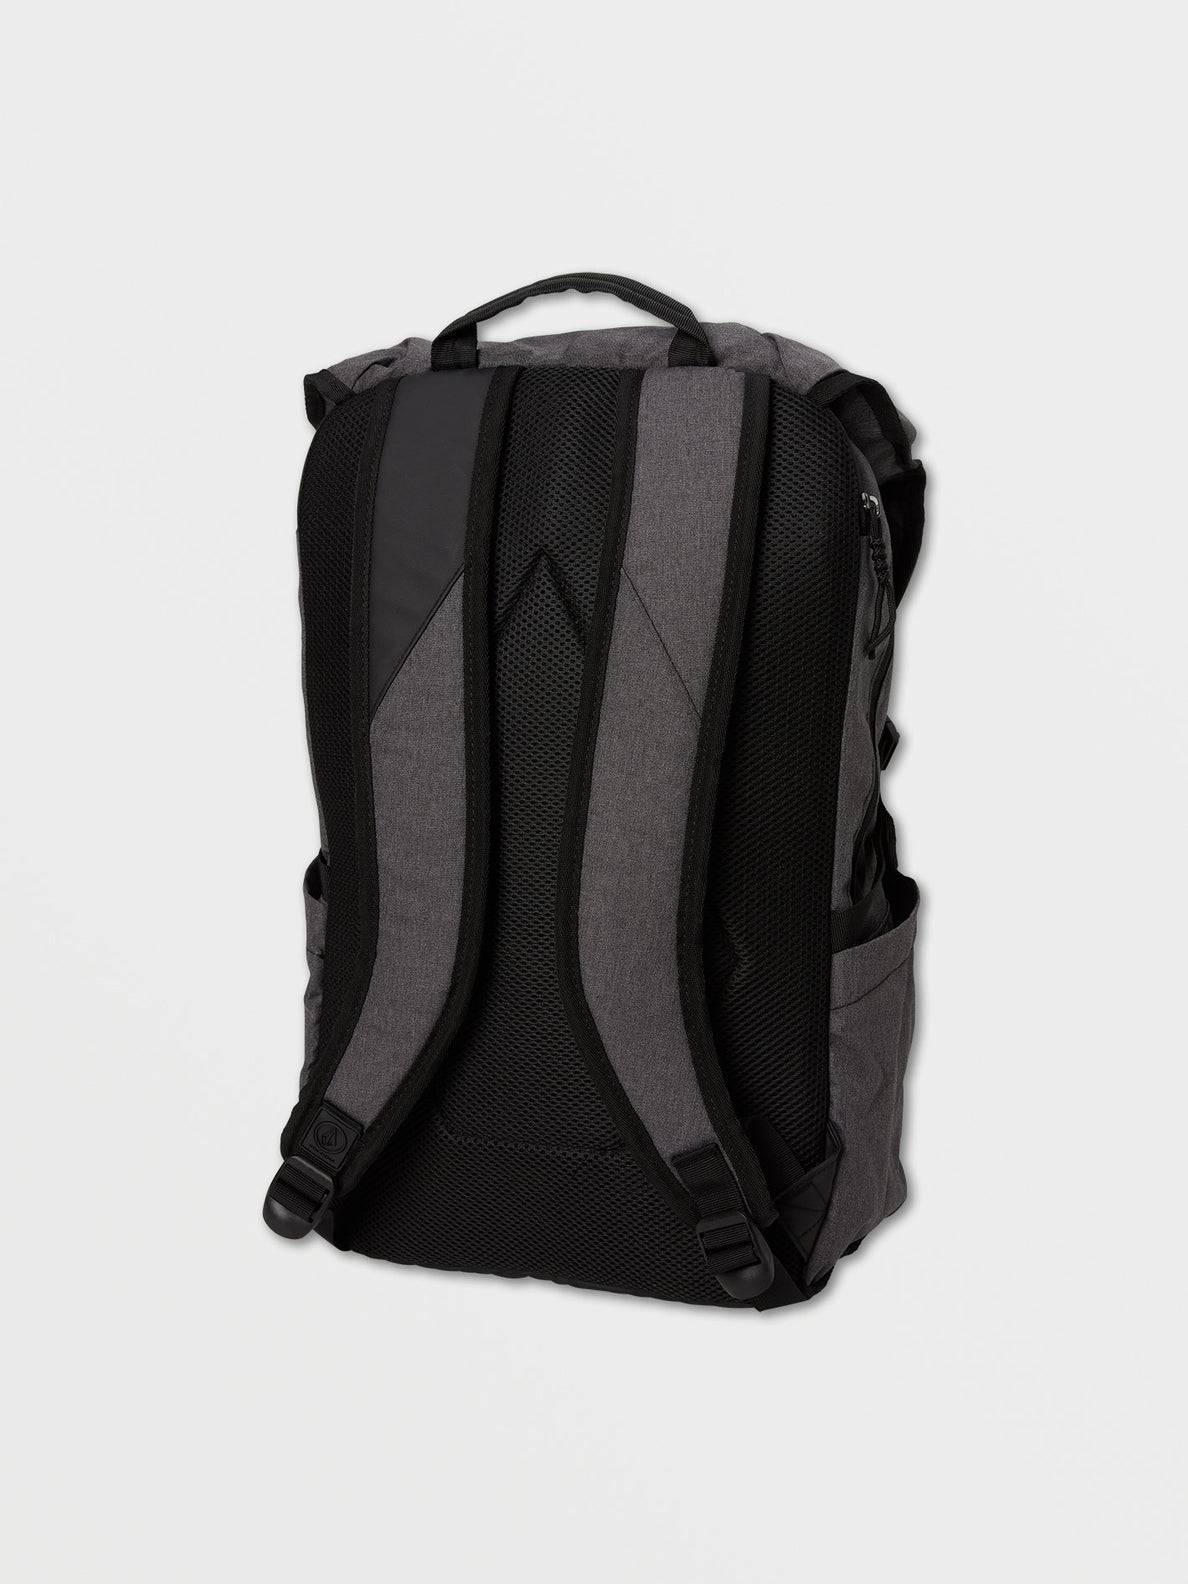 Volcom Substrate Backpack - CHARCOAL HEATHER (D6532107_CHH) [B]